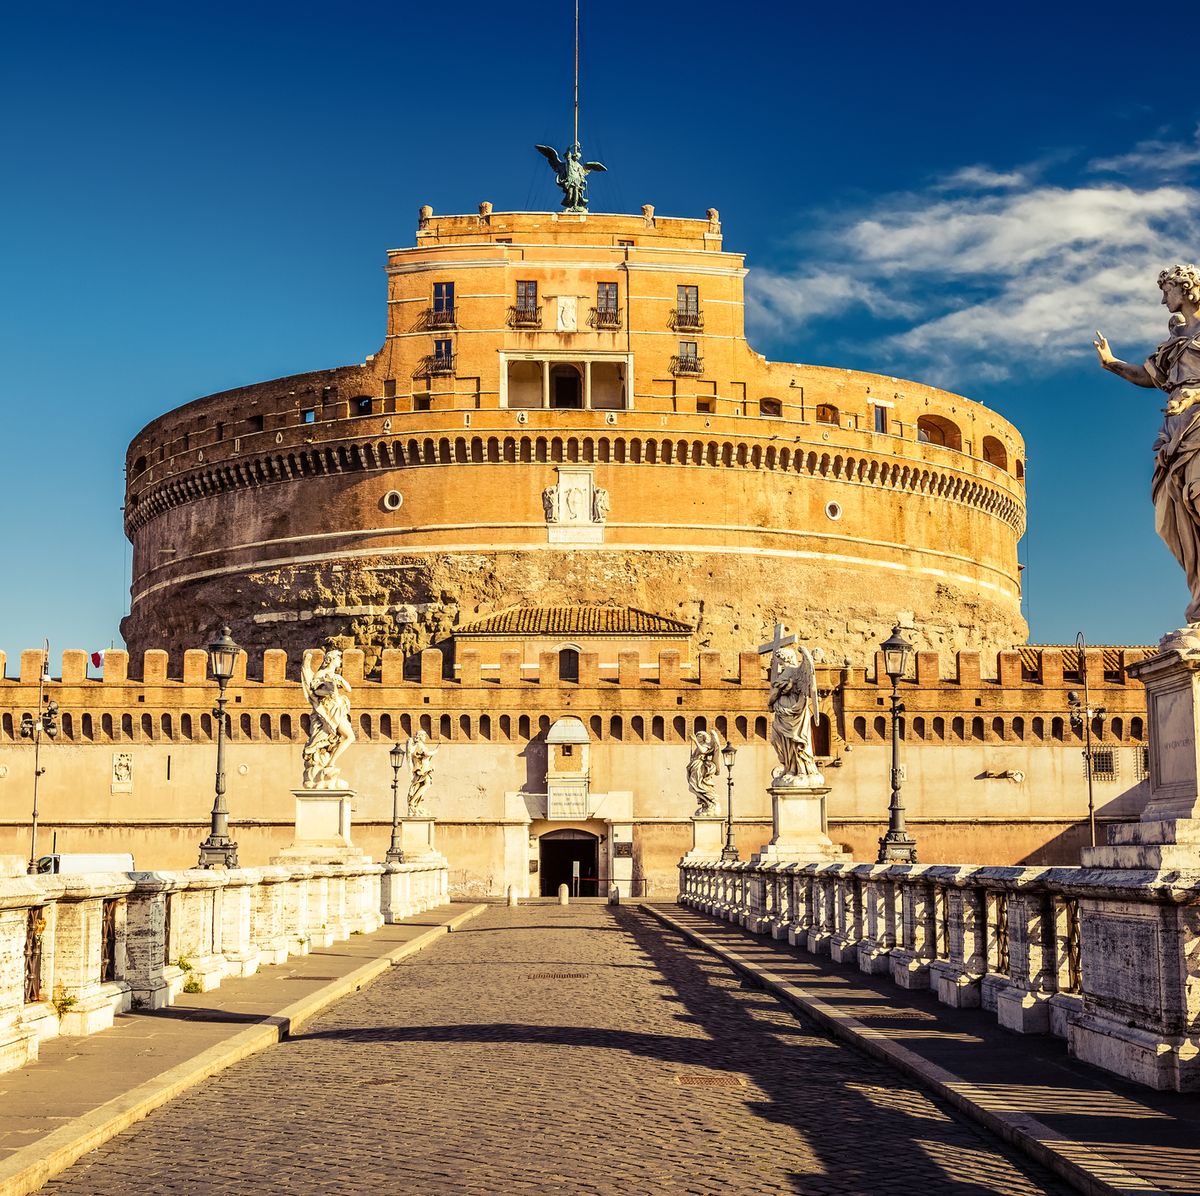 https://hips.hearstapps.com/hmg-prod/images/santangelo-fortress-rome-royalty-free-image-471072894-1567525050.jpg?crop=0.669xw:1.00xh;0.139xw,0&resize=1200:*